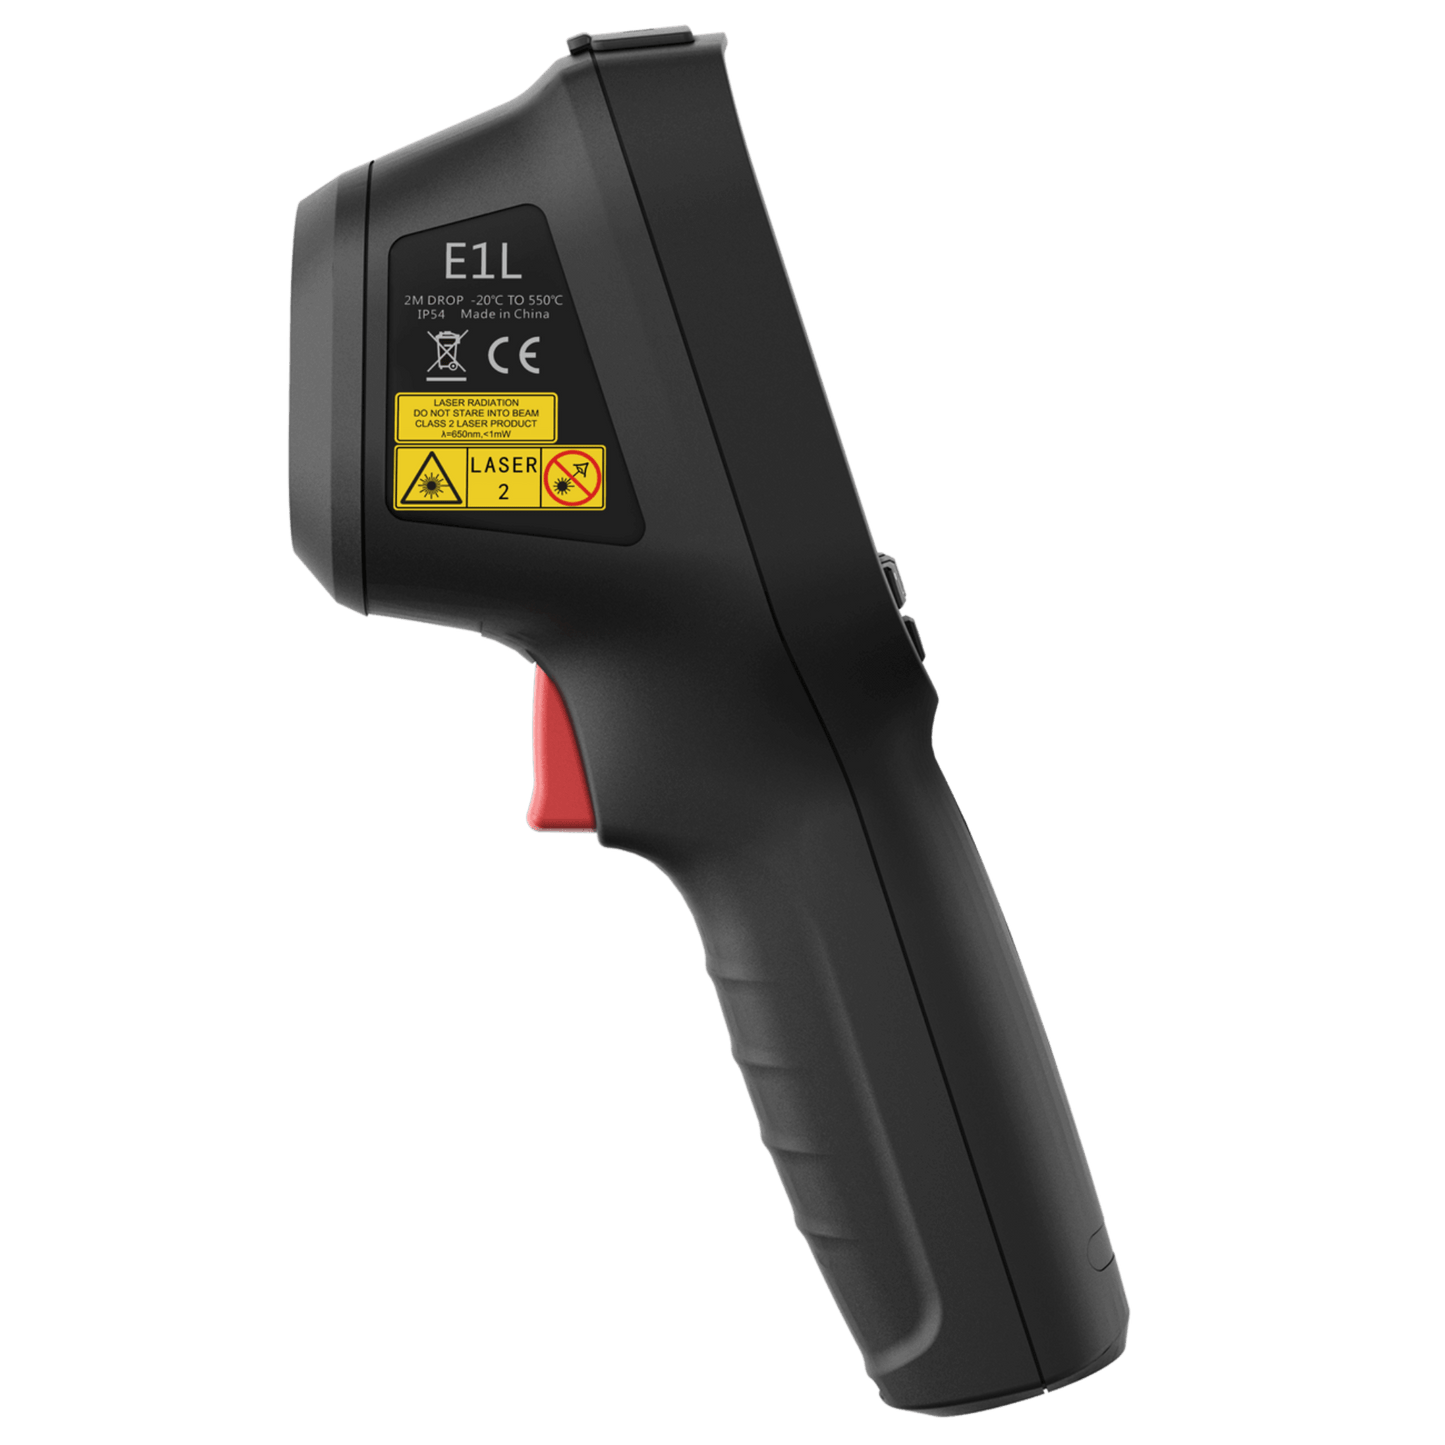 HikMicro E1L Handheld Thermal Camera Left Side View